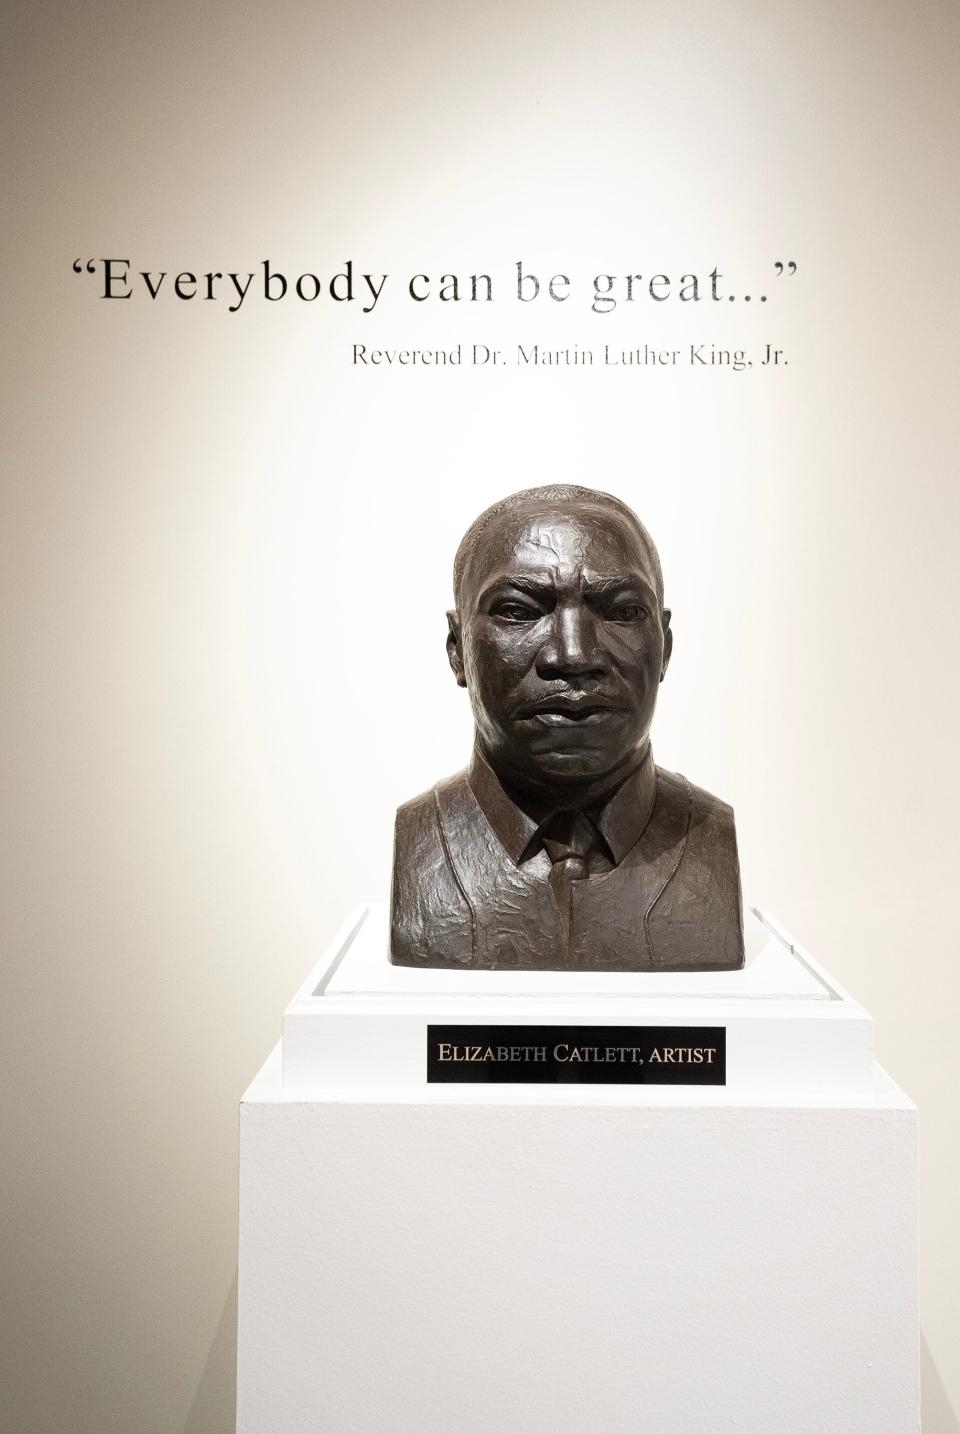 A bronze bust of Martin Luther King Jr. by artist Elizabeth Catlett at the entrance to the King Arts Complex.